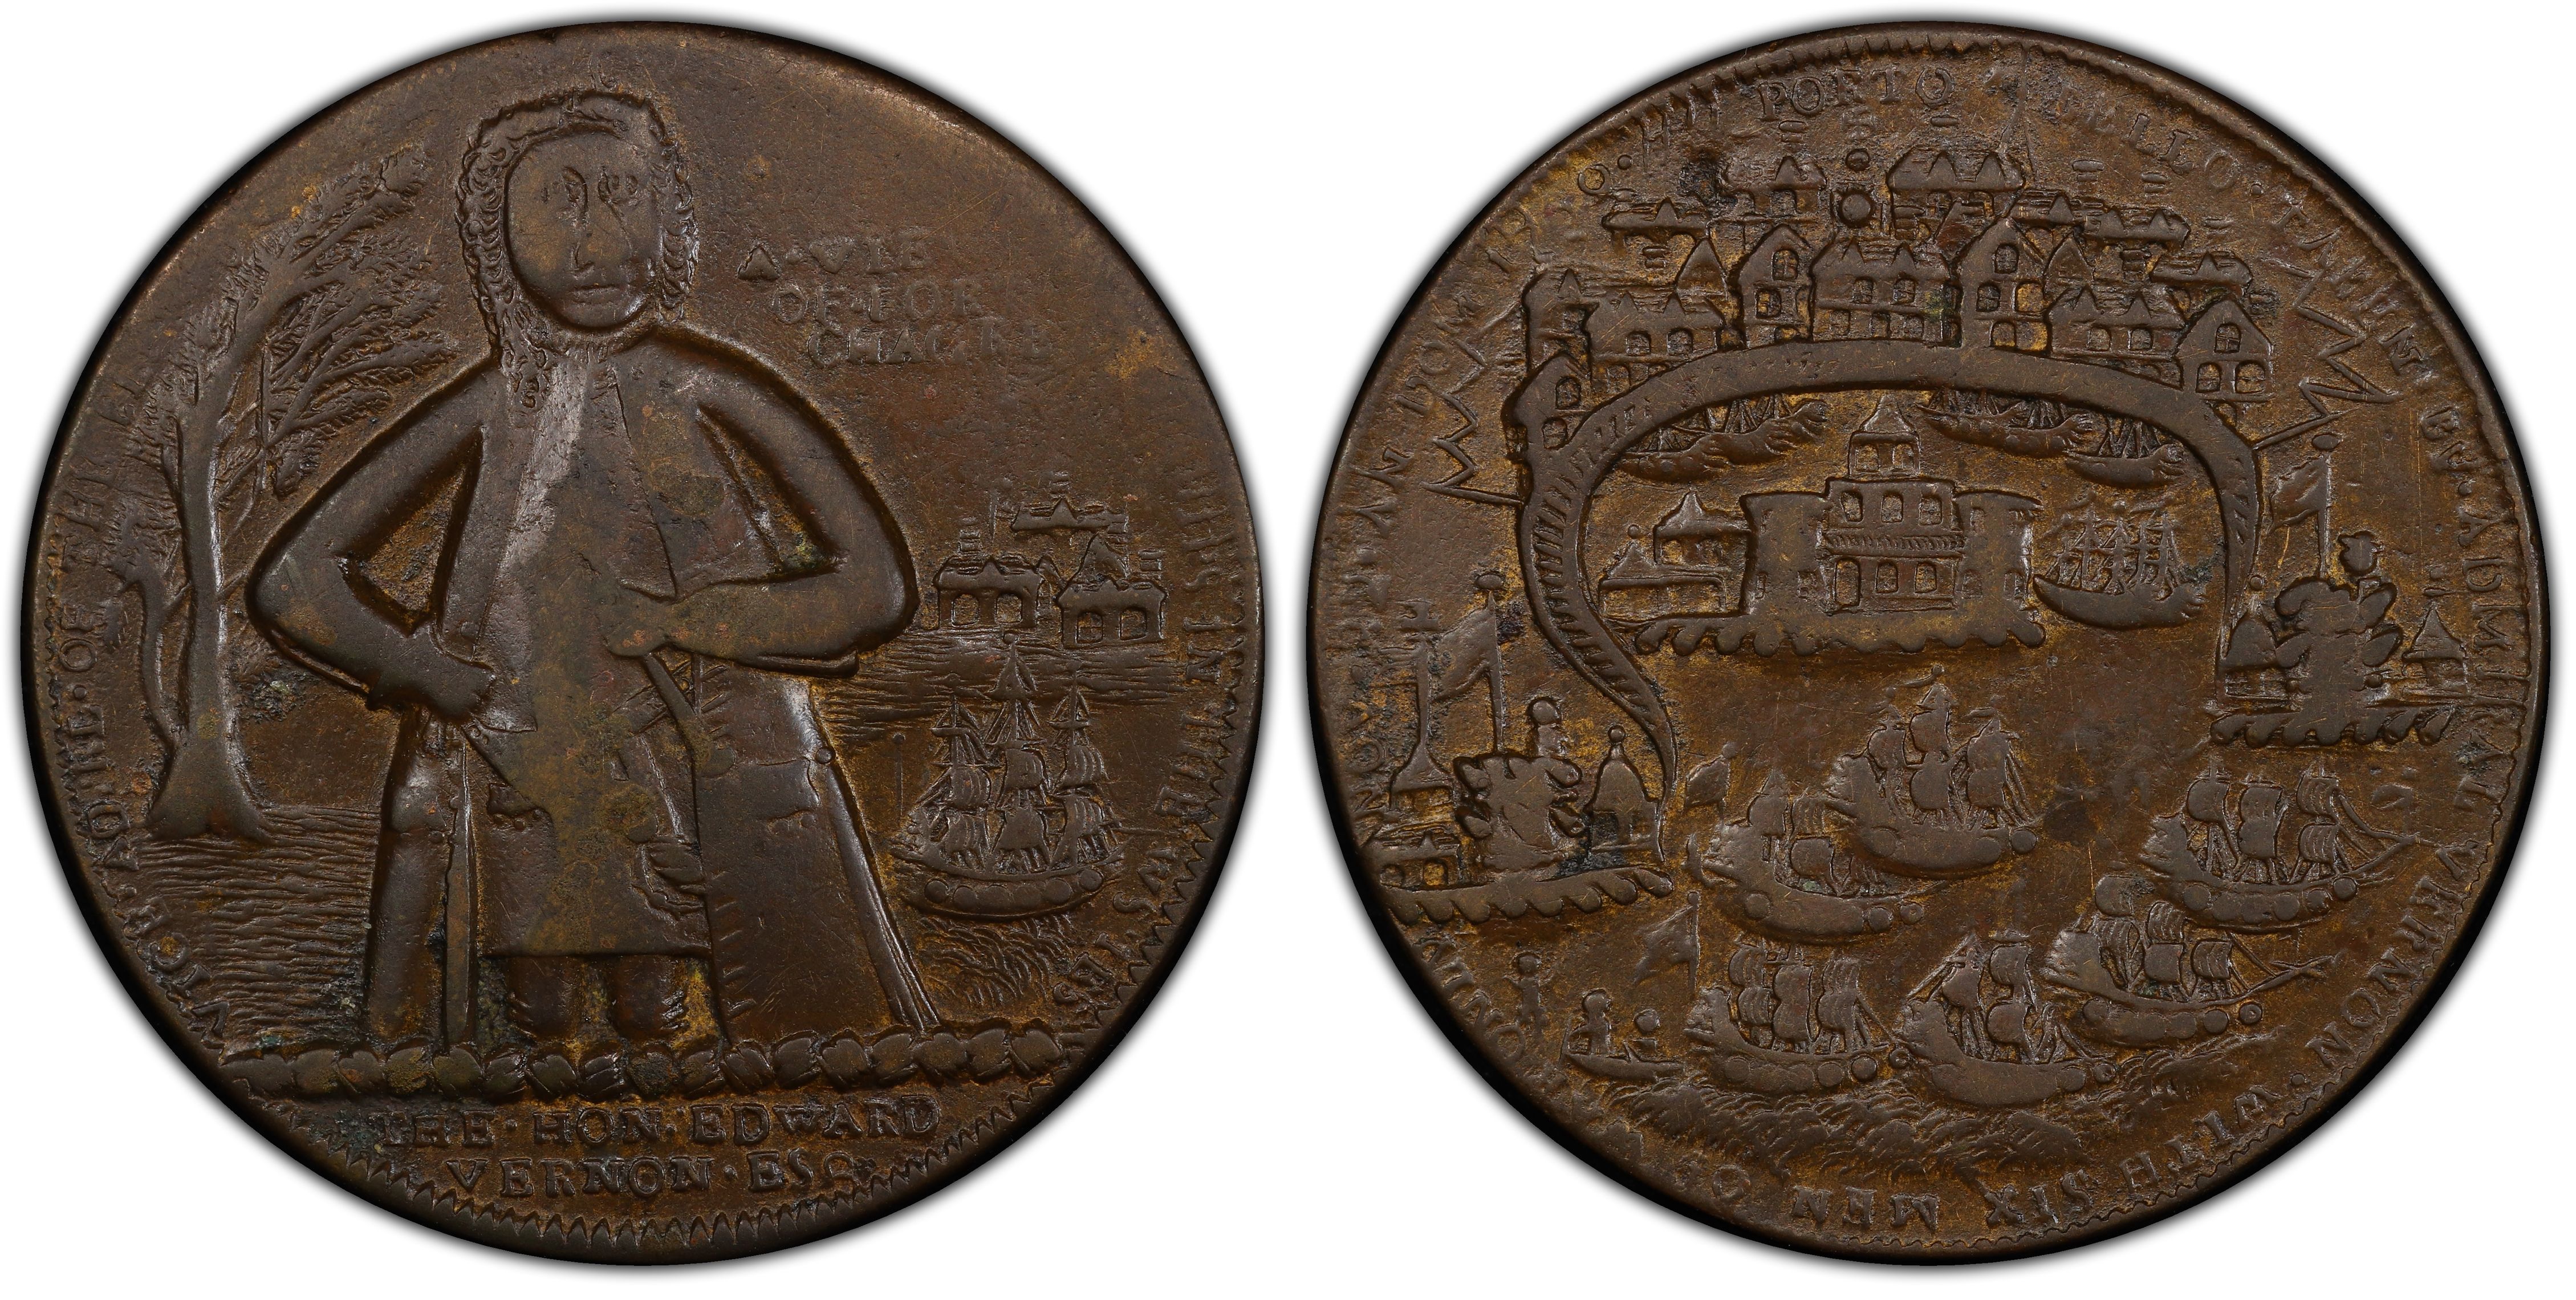 Admiral Vernon Medal – Works – Museum Collection